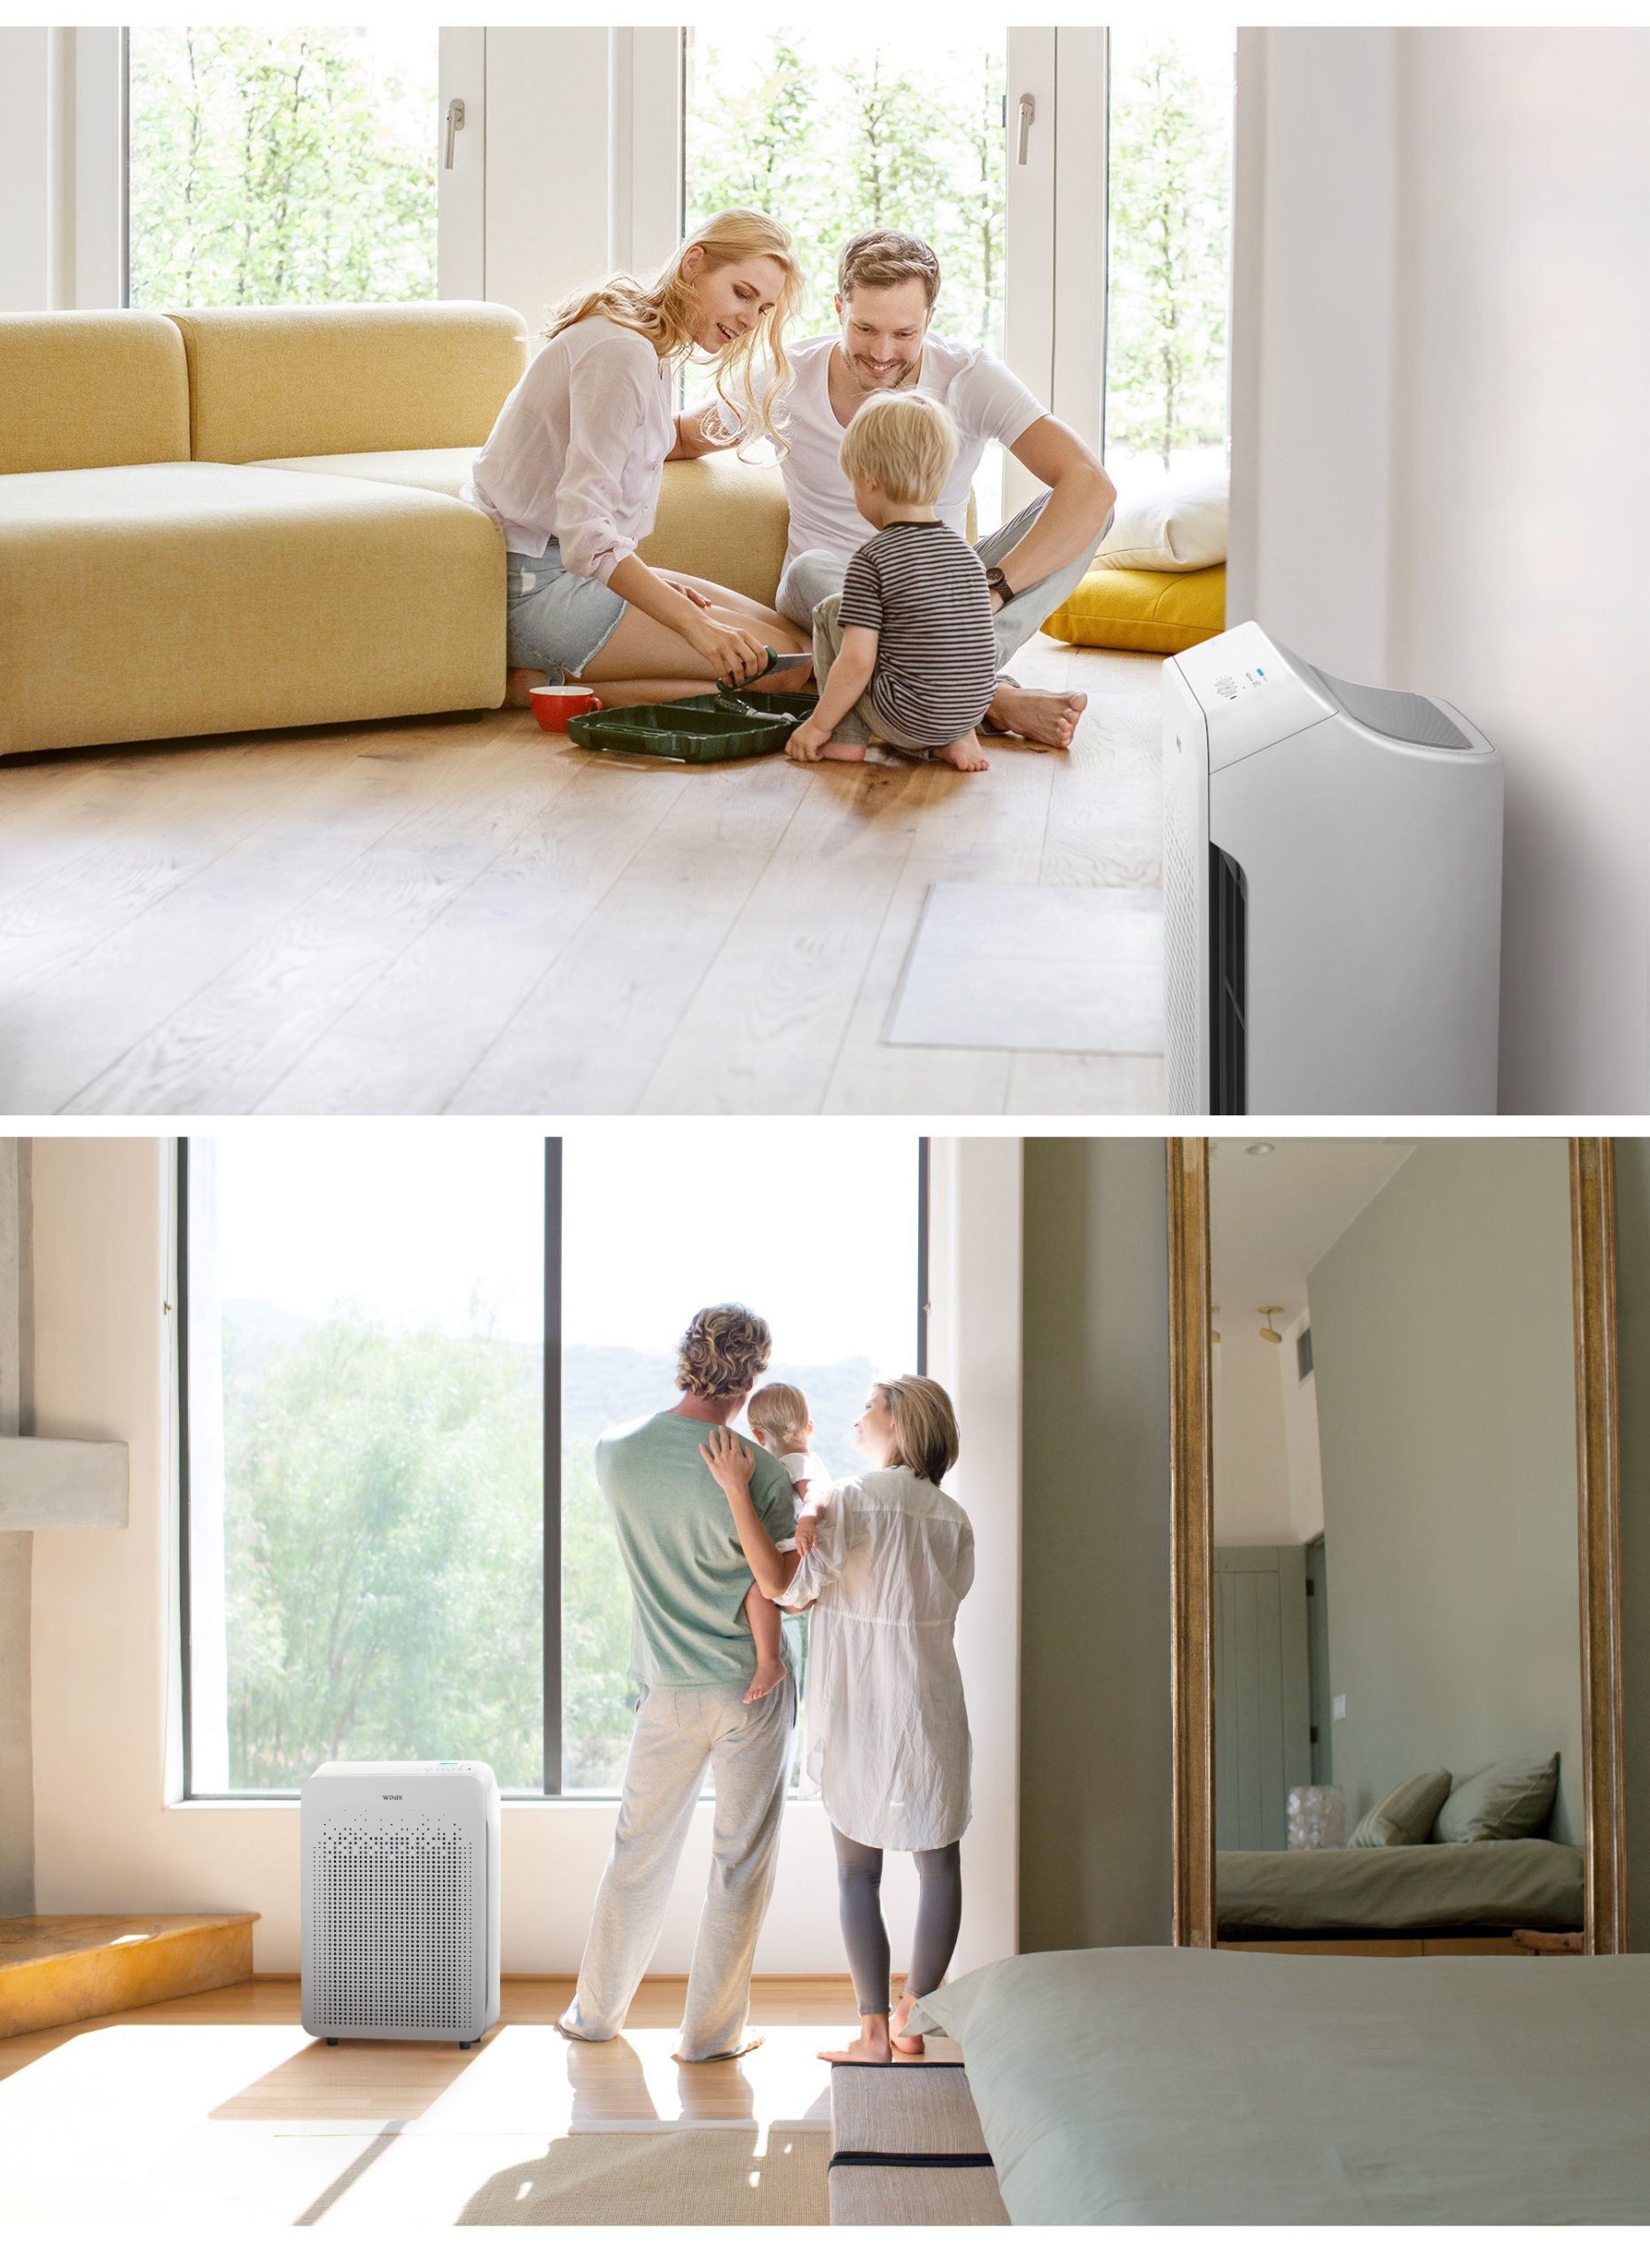 Two images of C545 Air Purifier on floor in bedroom next to two parents holding a baby and on the floor playing with the baby